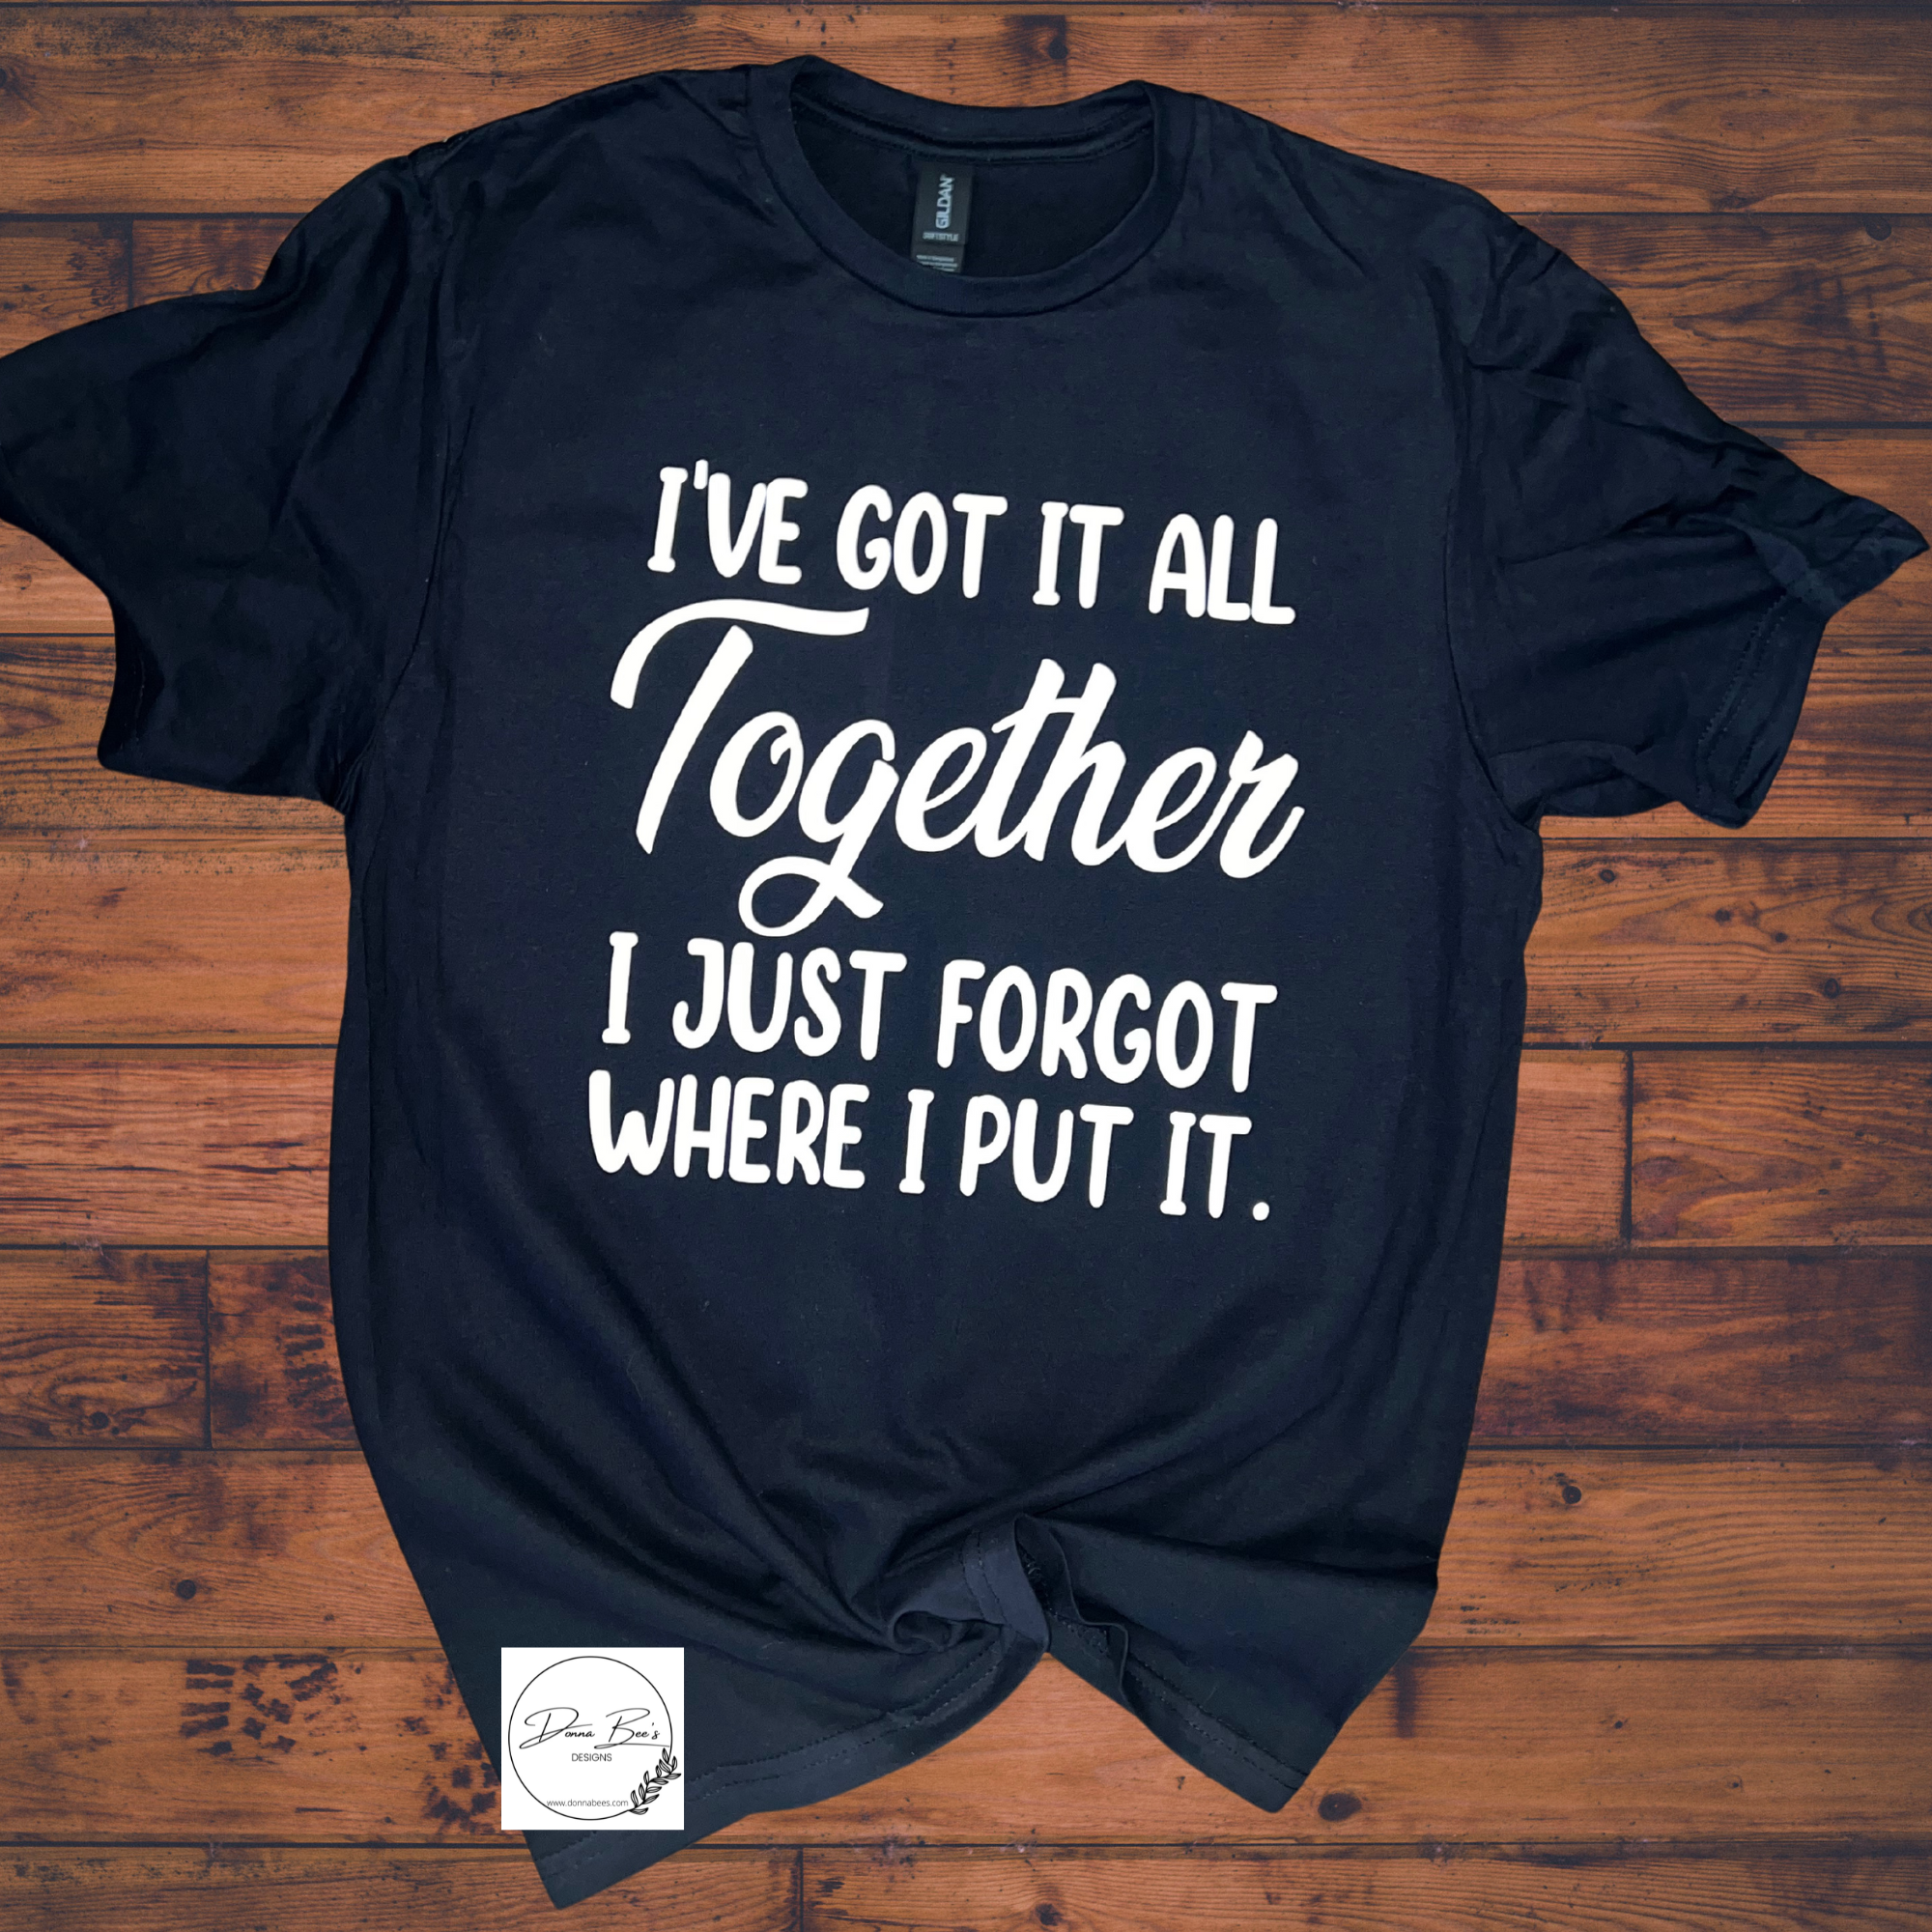 I’ve got it all together T-shirt | funny | Humor tee